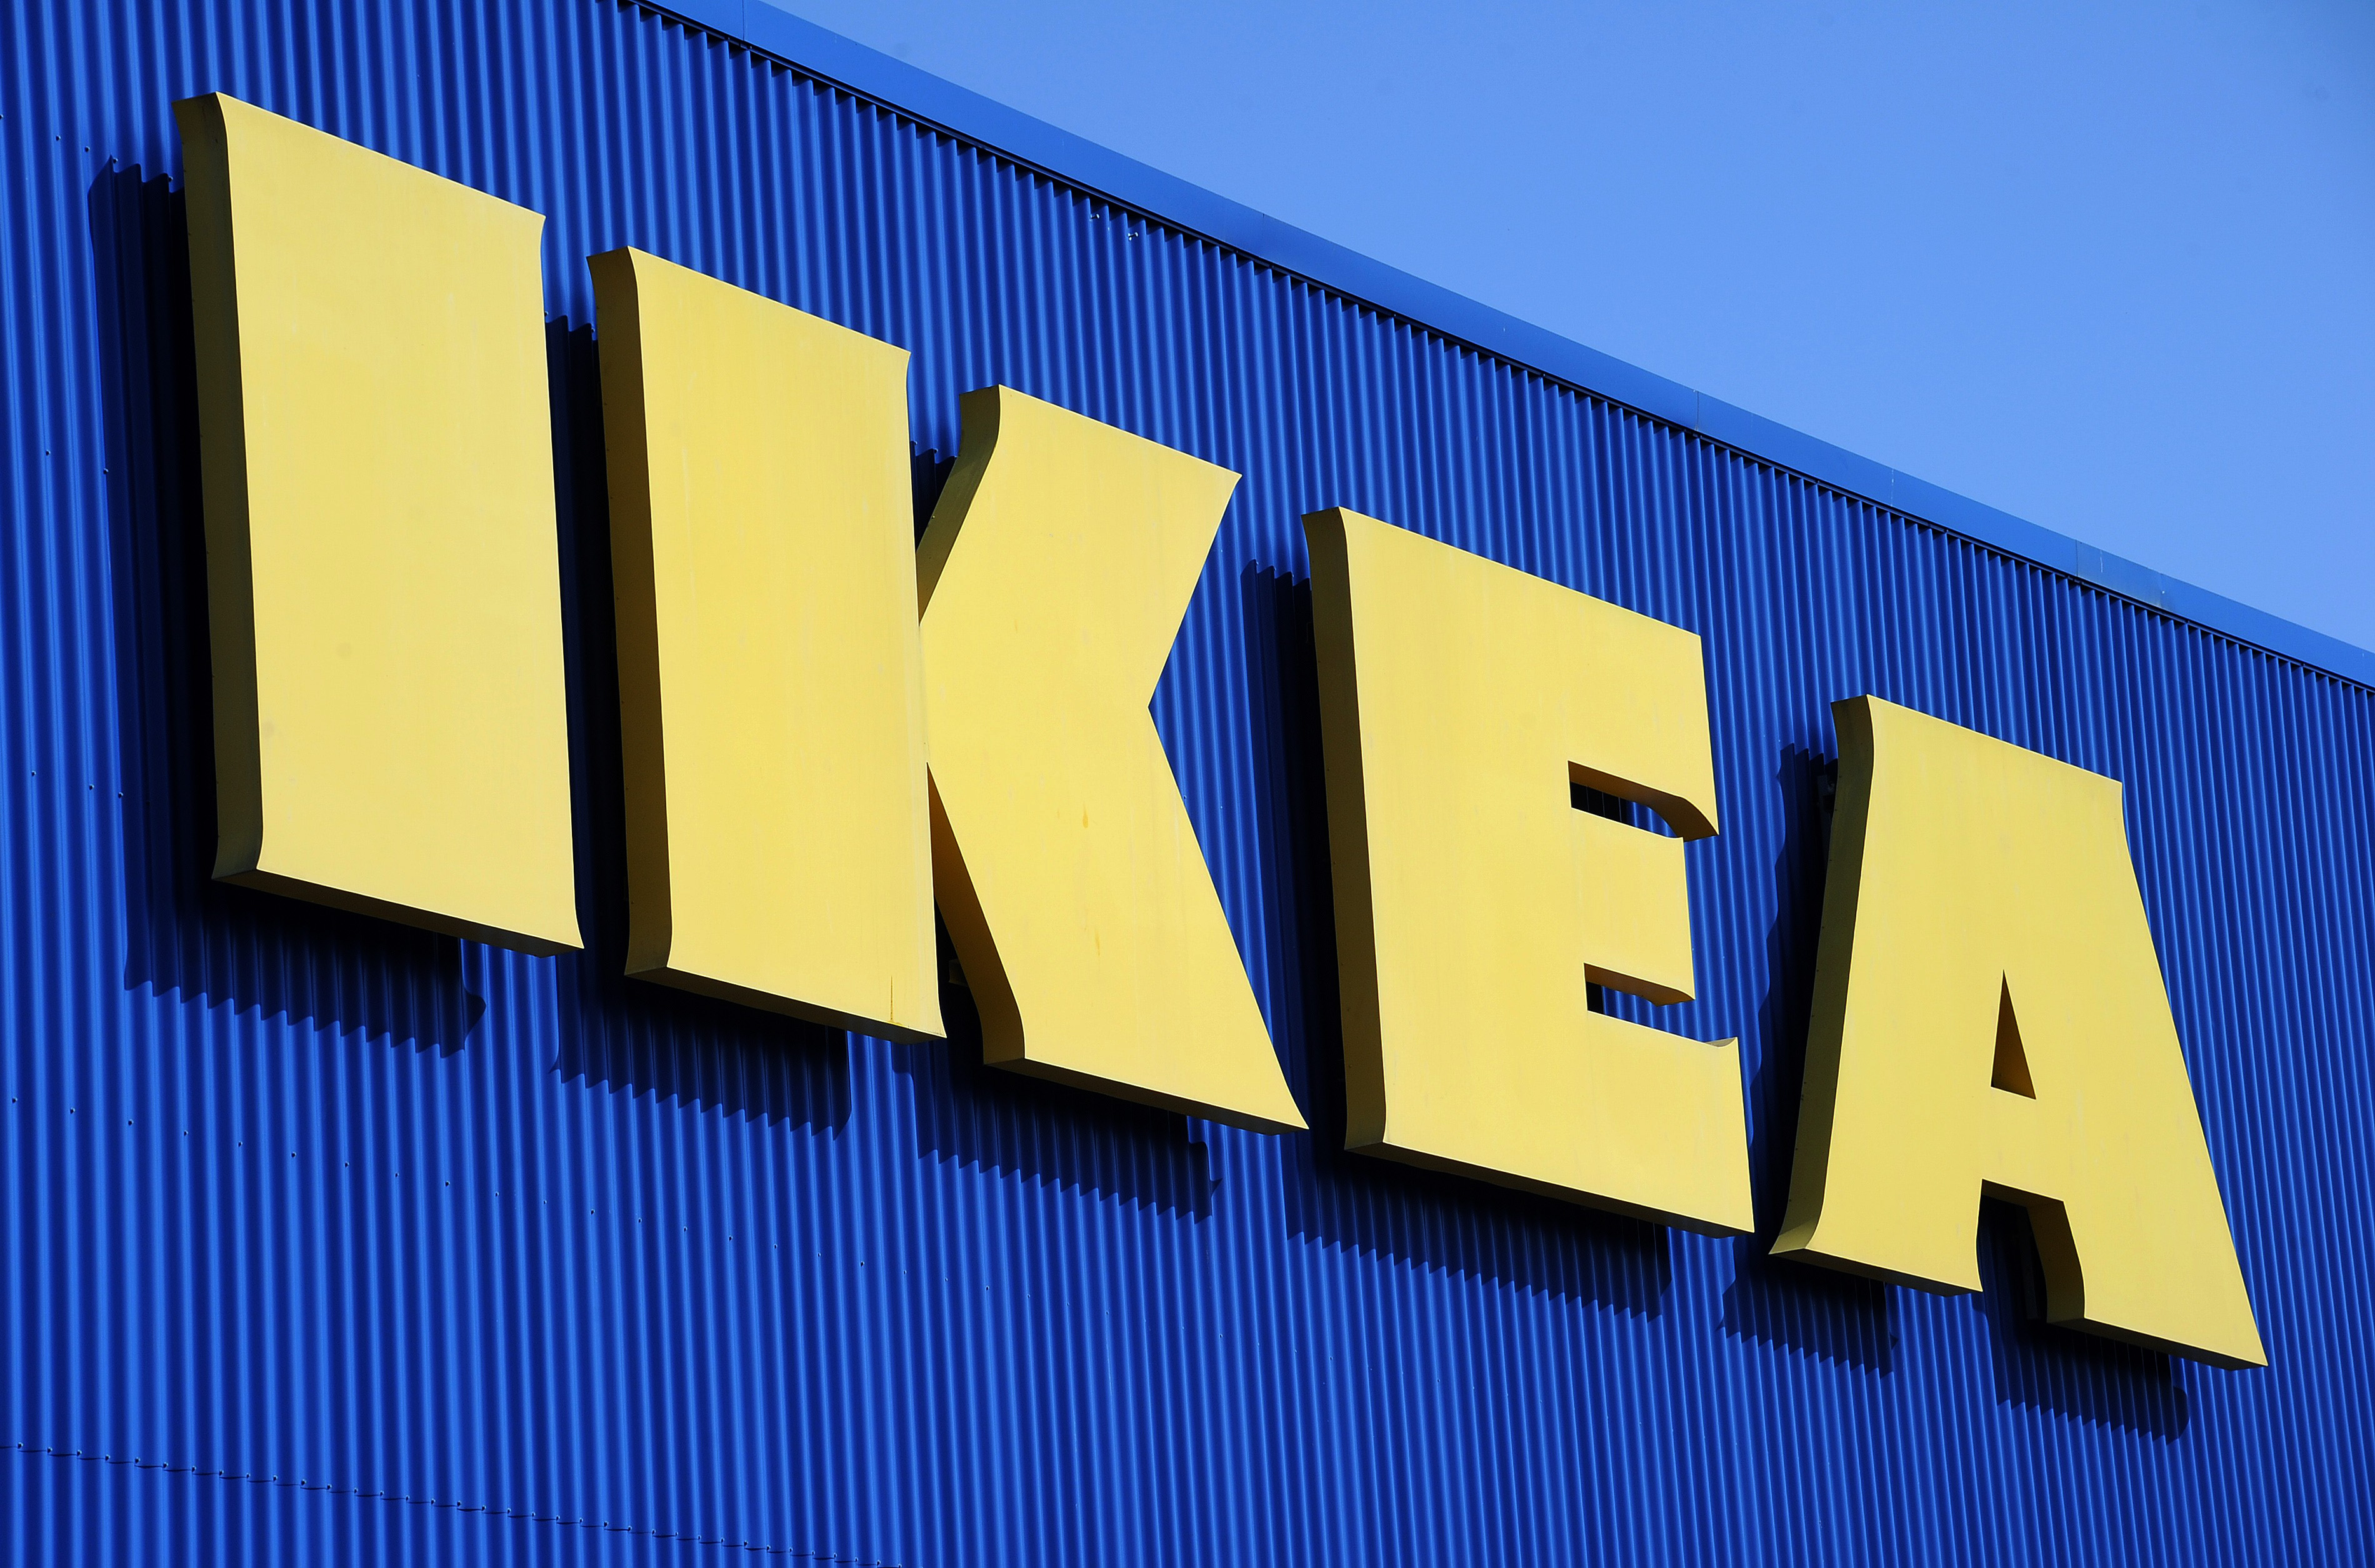 A picture taken on March 27, 2013 shows the sign of Swedish furniture giant Ikea at the Odysseum shopping mall, in Montpellier, southern France. (Pascal Guyot&mdash;AFP/Getty Images)